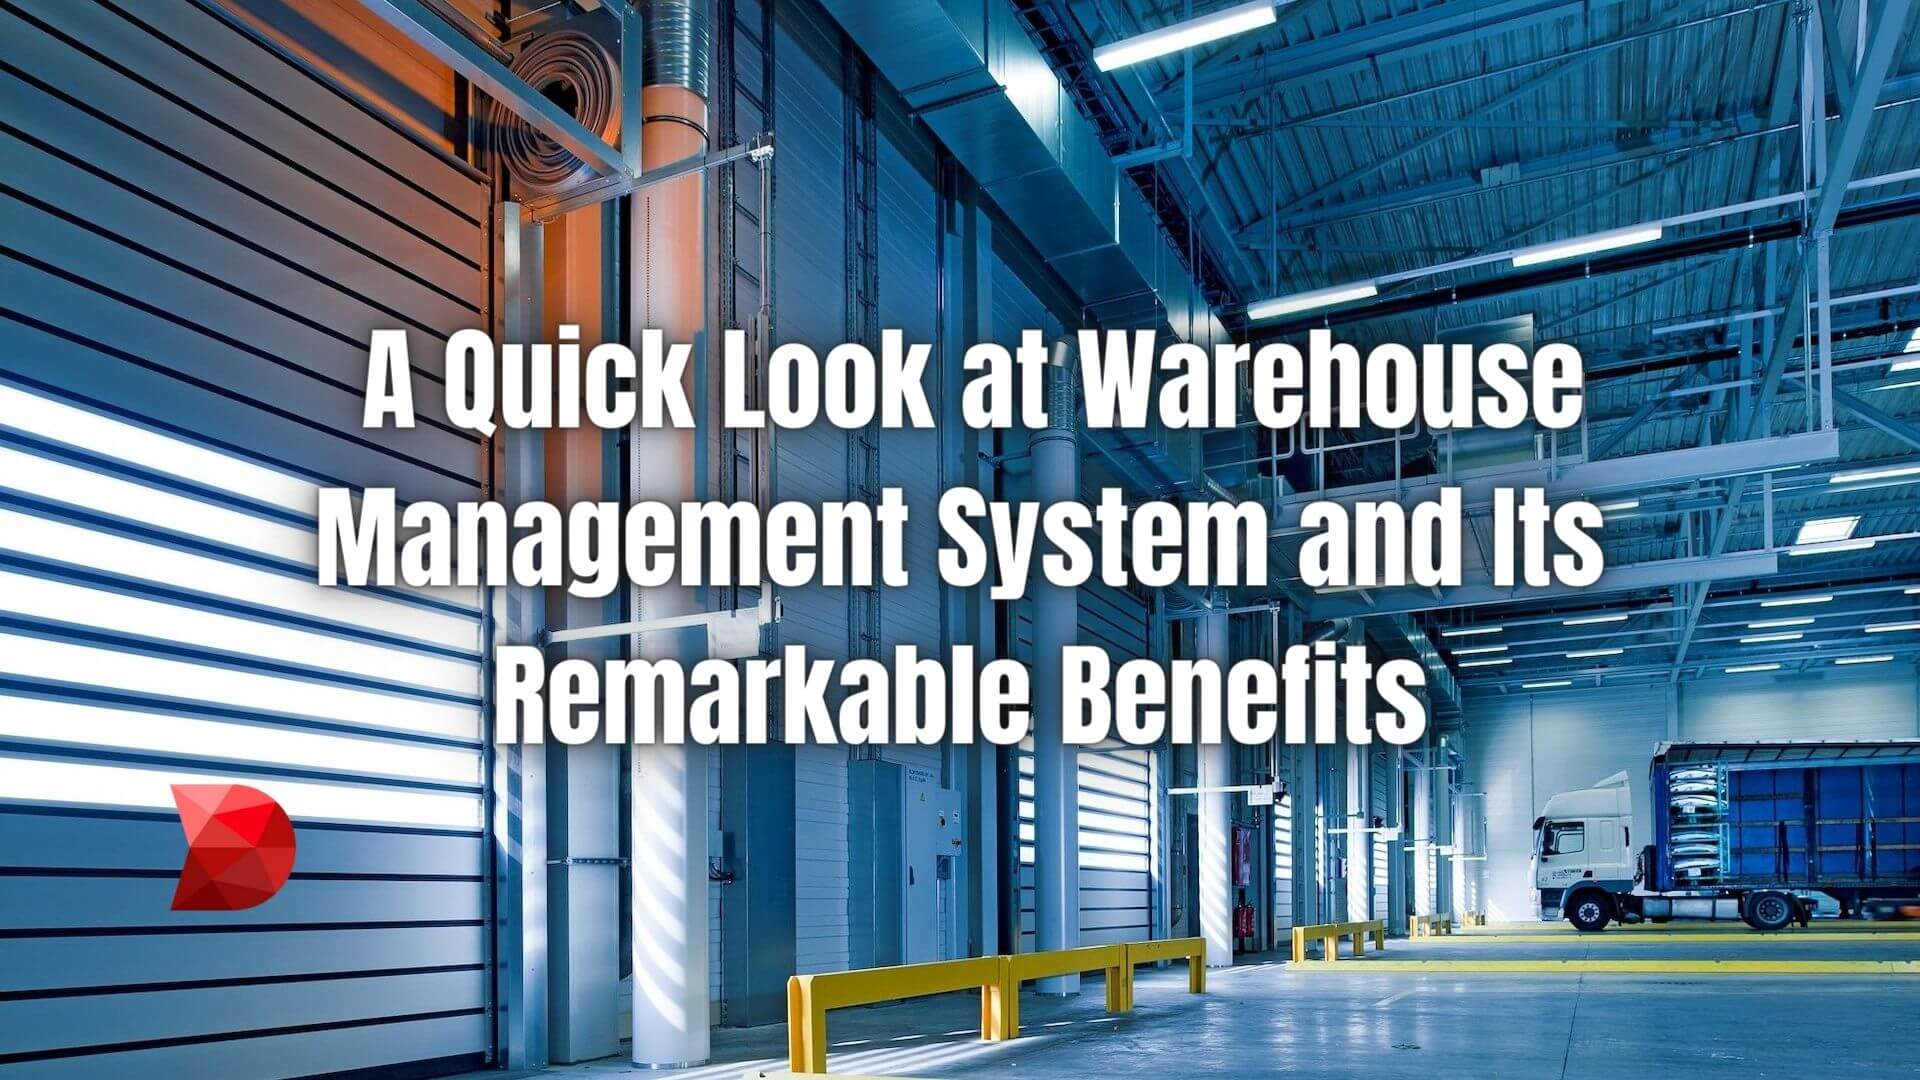 A Warehouse Management System optimizes warehouse functionality and distribution management. Here are the benefits of warehouse management.